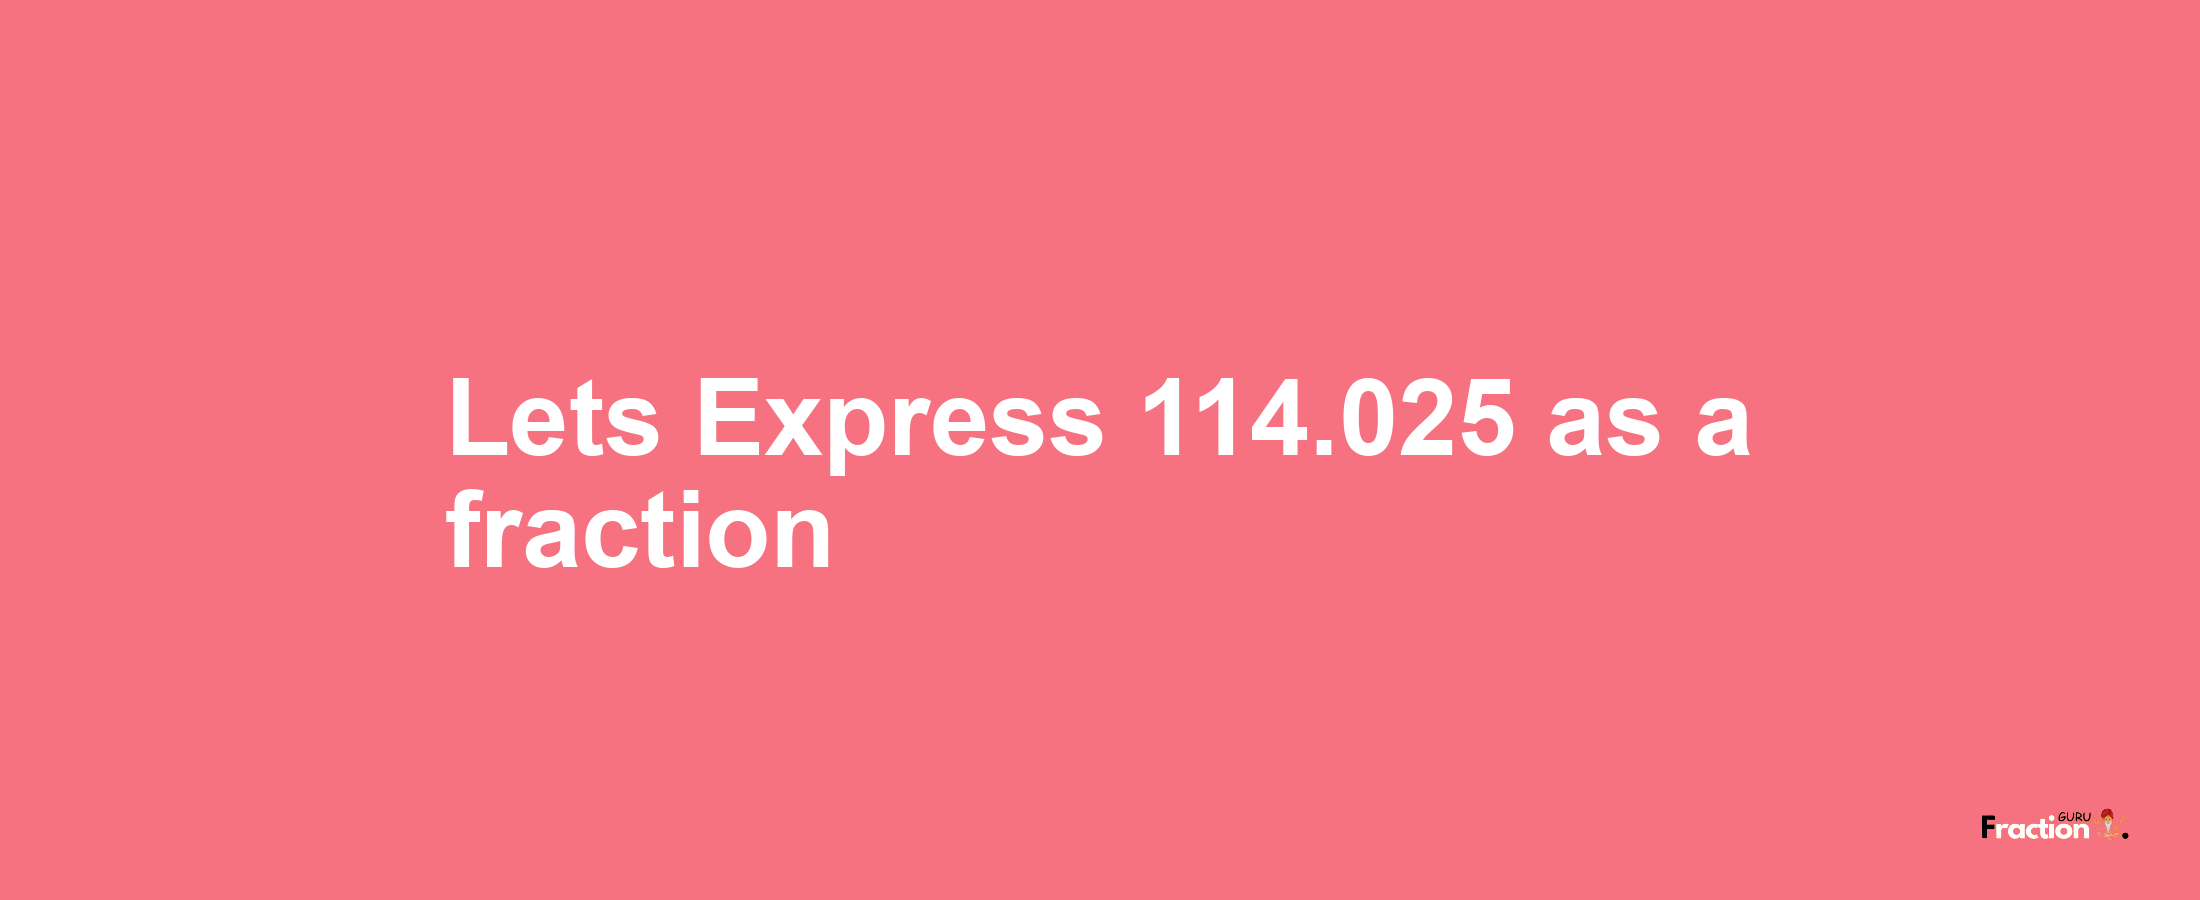 Lets Express 114.025 as afraction